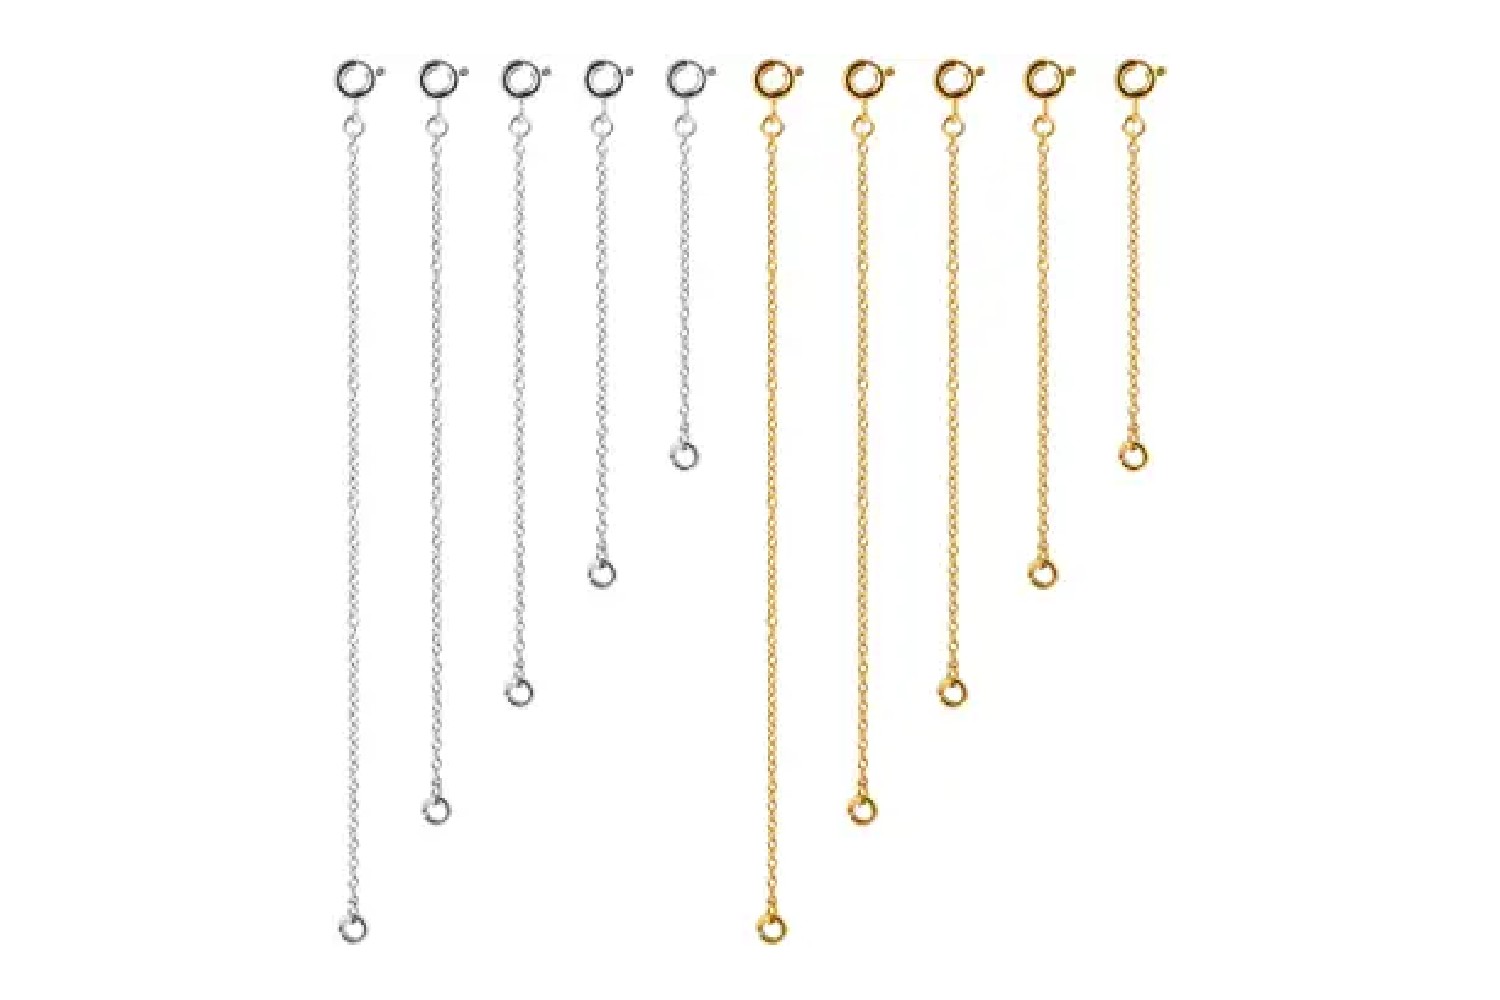 UNICRAFTALE about 60 Strands 3 Colors 45mm Stainless Steel Chain Extender Hypoallergenic Link Chain Necklace Extender Bracelet Extender for Jewelry Chain Making